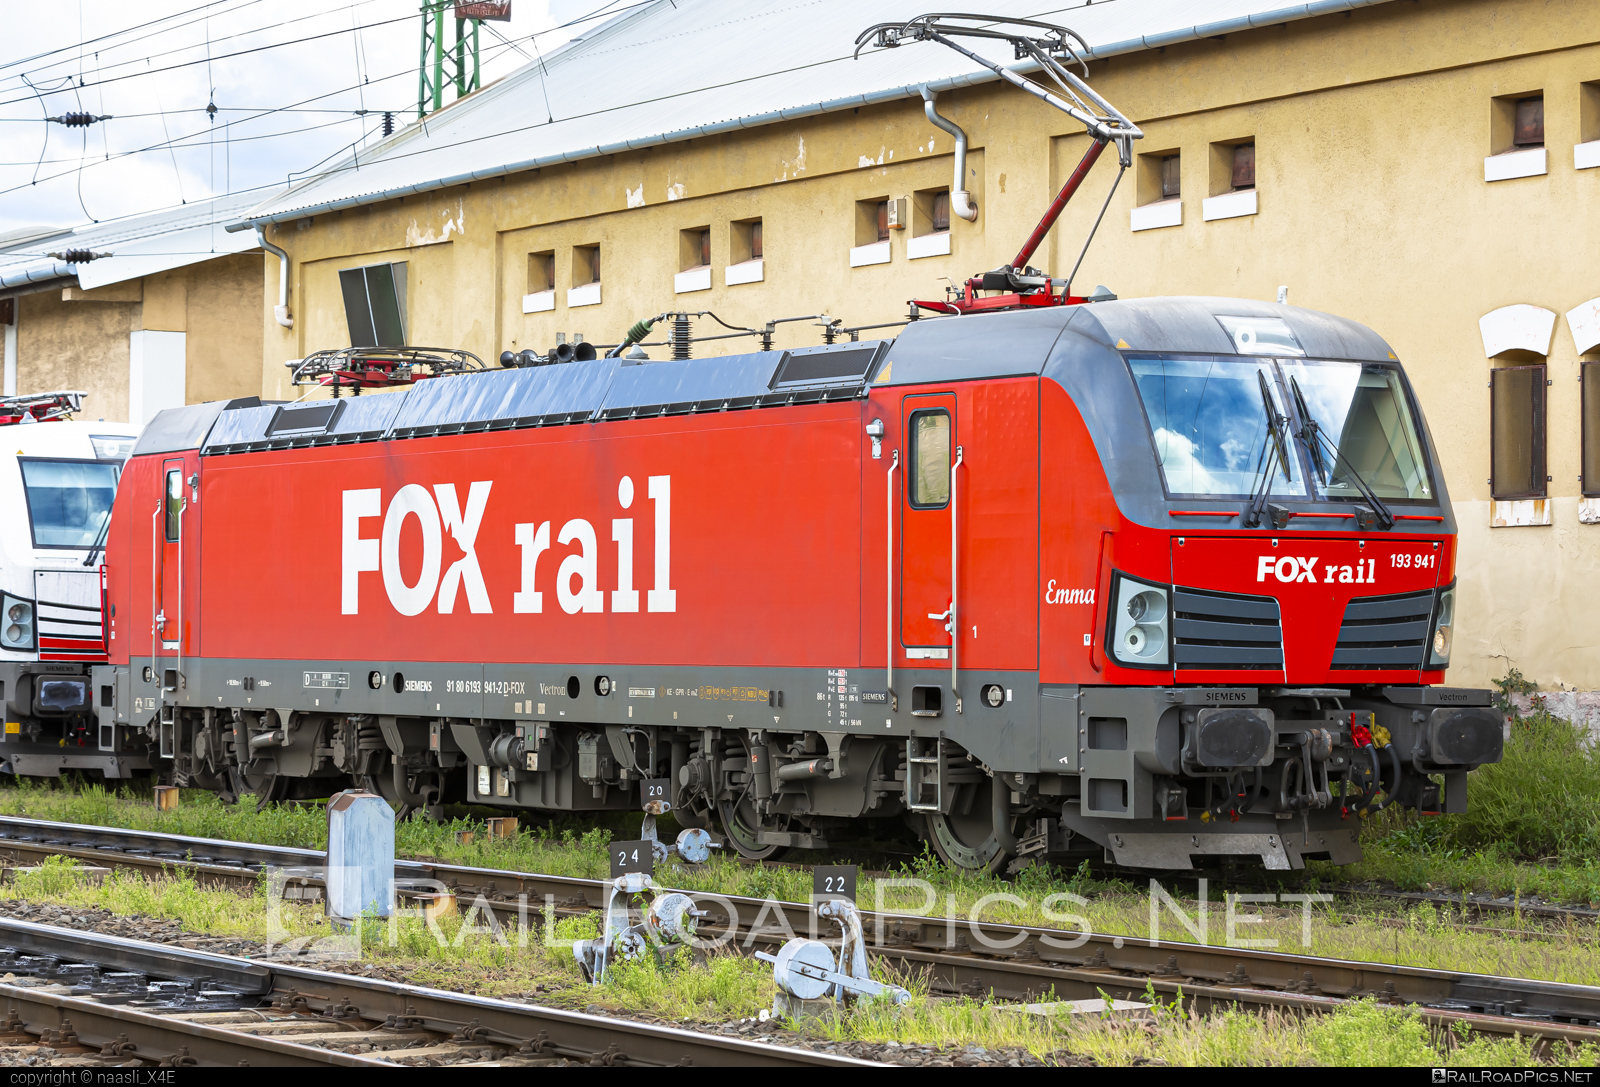 Siemens Vectron AC - 193 941 operated by FOXrail Zrt. #foxrail #siemens #siemensVectron #siemensVectronAC #vectron #vectronAC